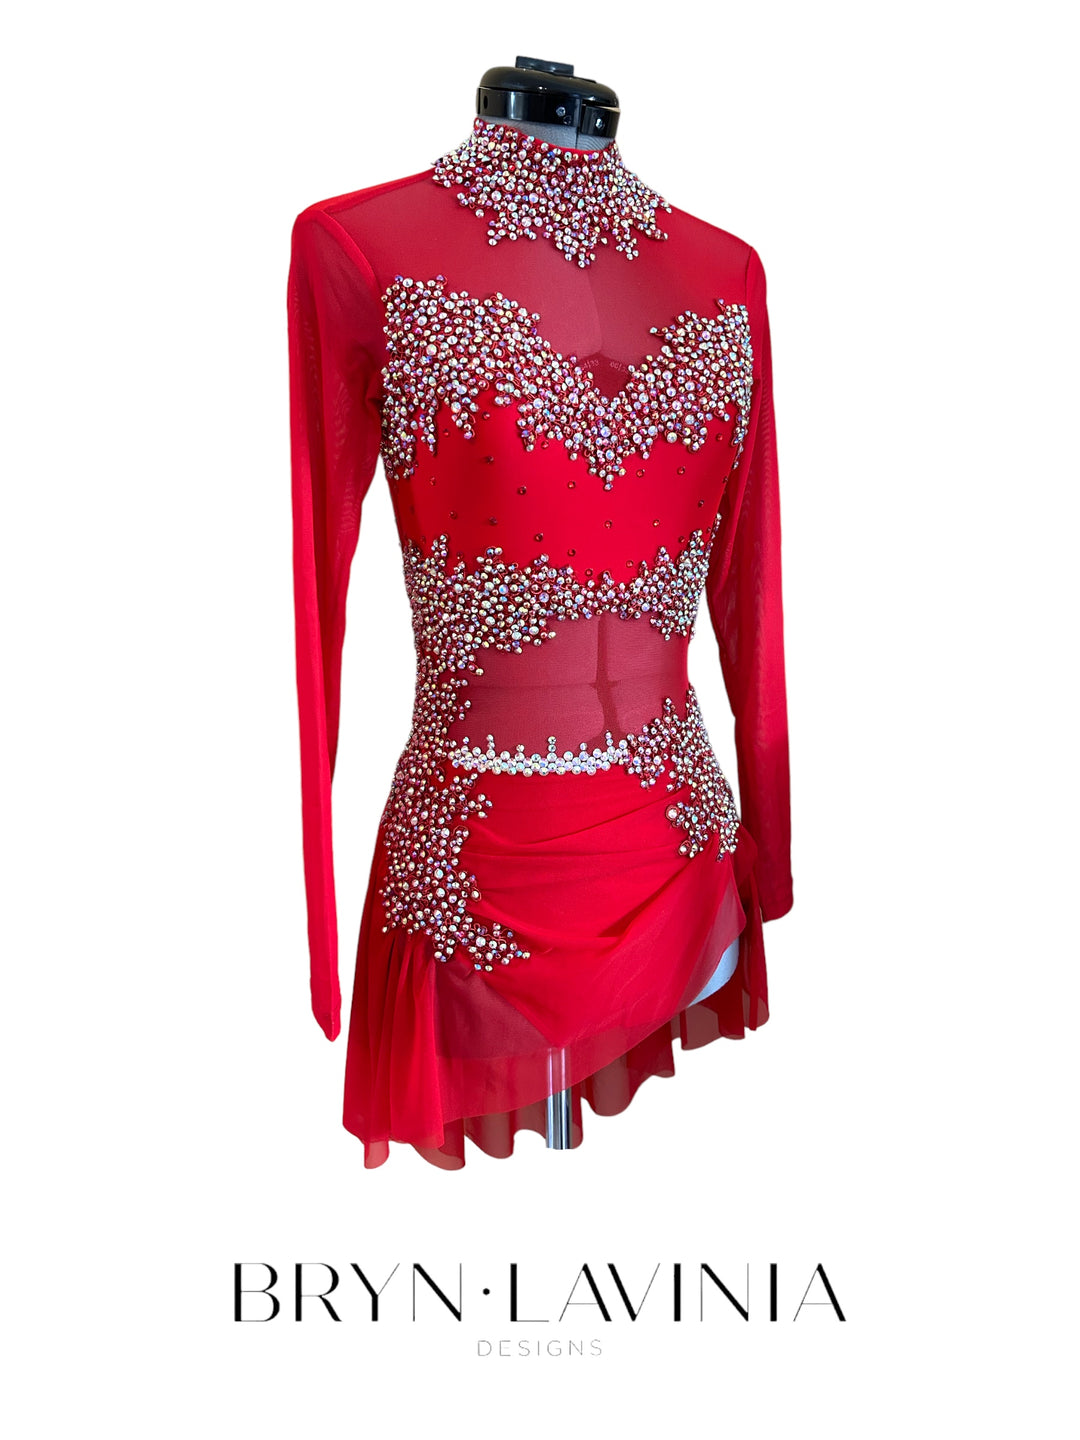 NEW AXS Red ready to ship costume